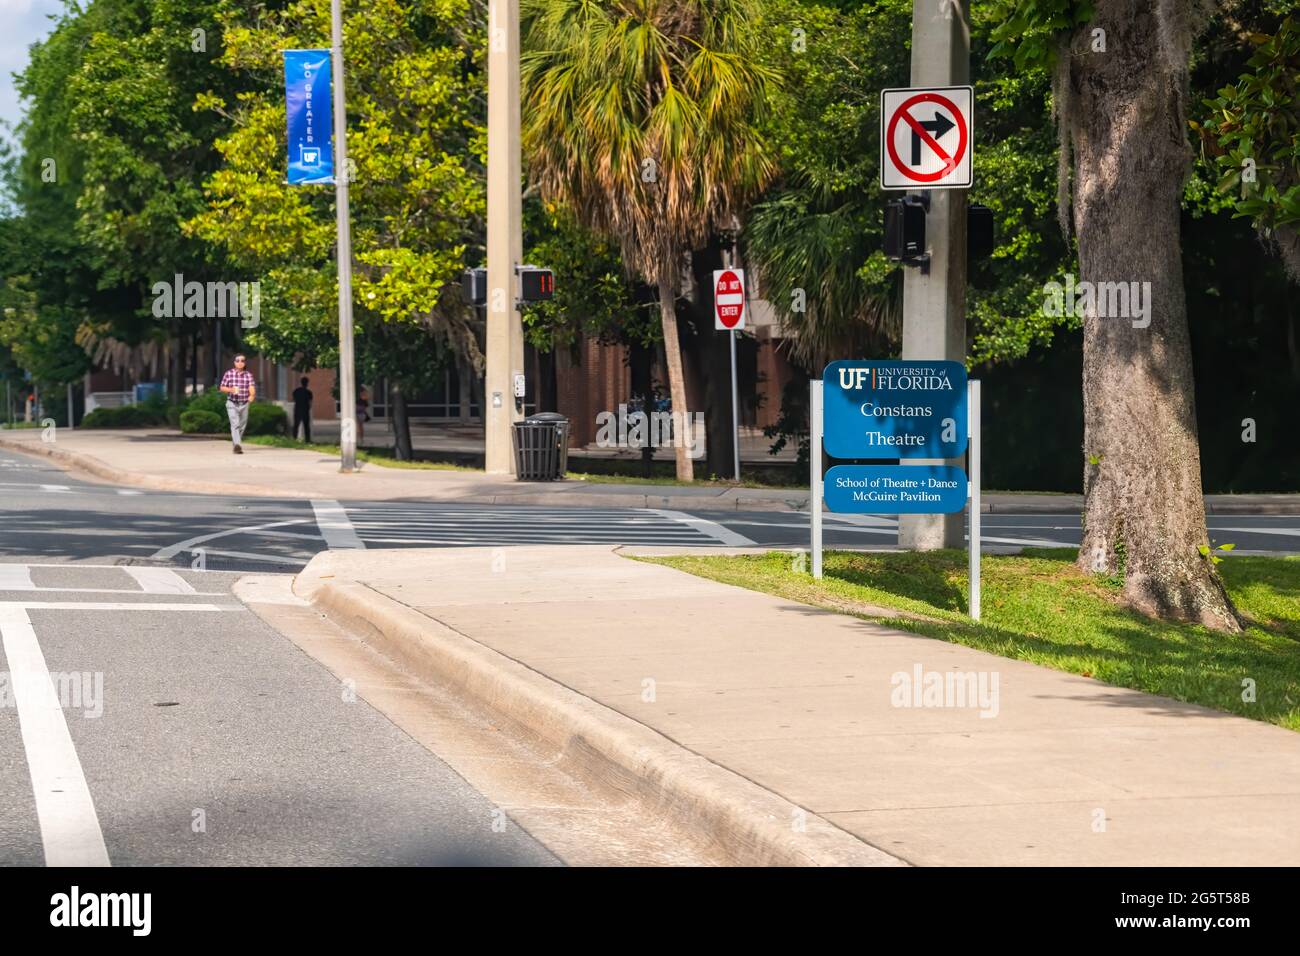 Gainesville, USA - April 27, 2018: University of Florida sign for constans theatre and dance mcguire pavilion on UF campus with students walking on si Stock Photo